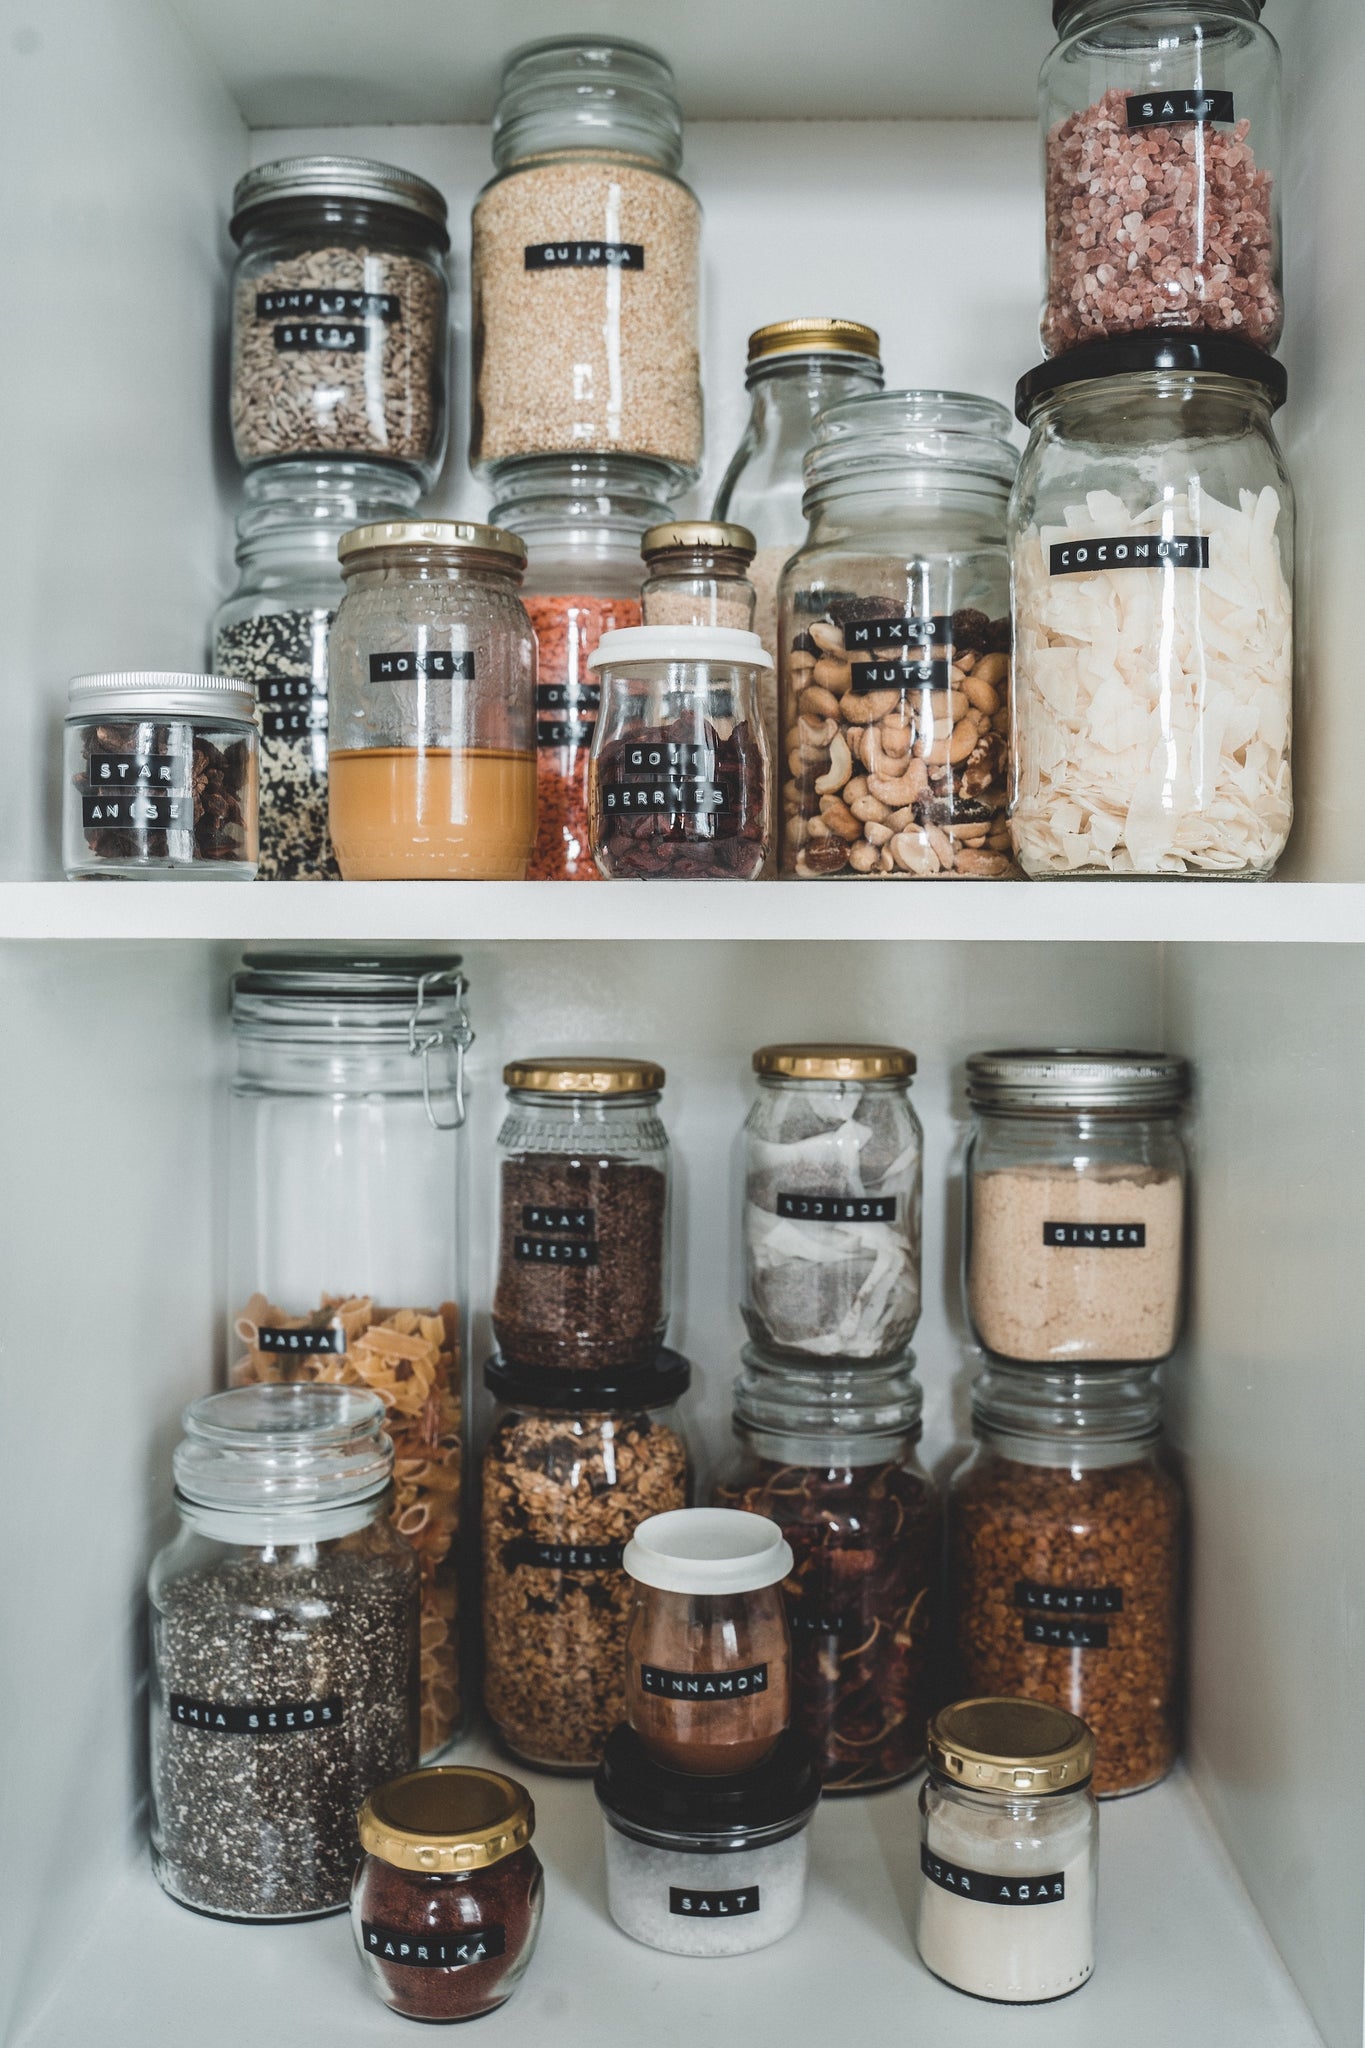 Quick Question: What's the Best Way to Stock my Pantry?